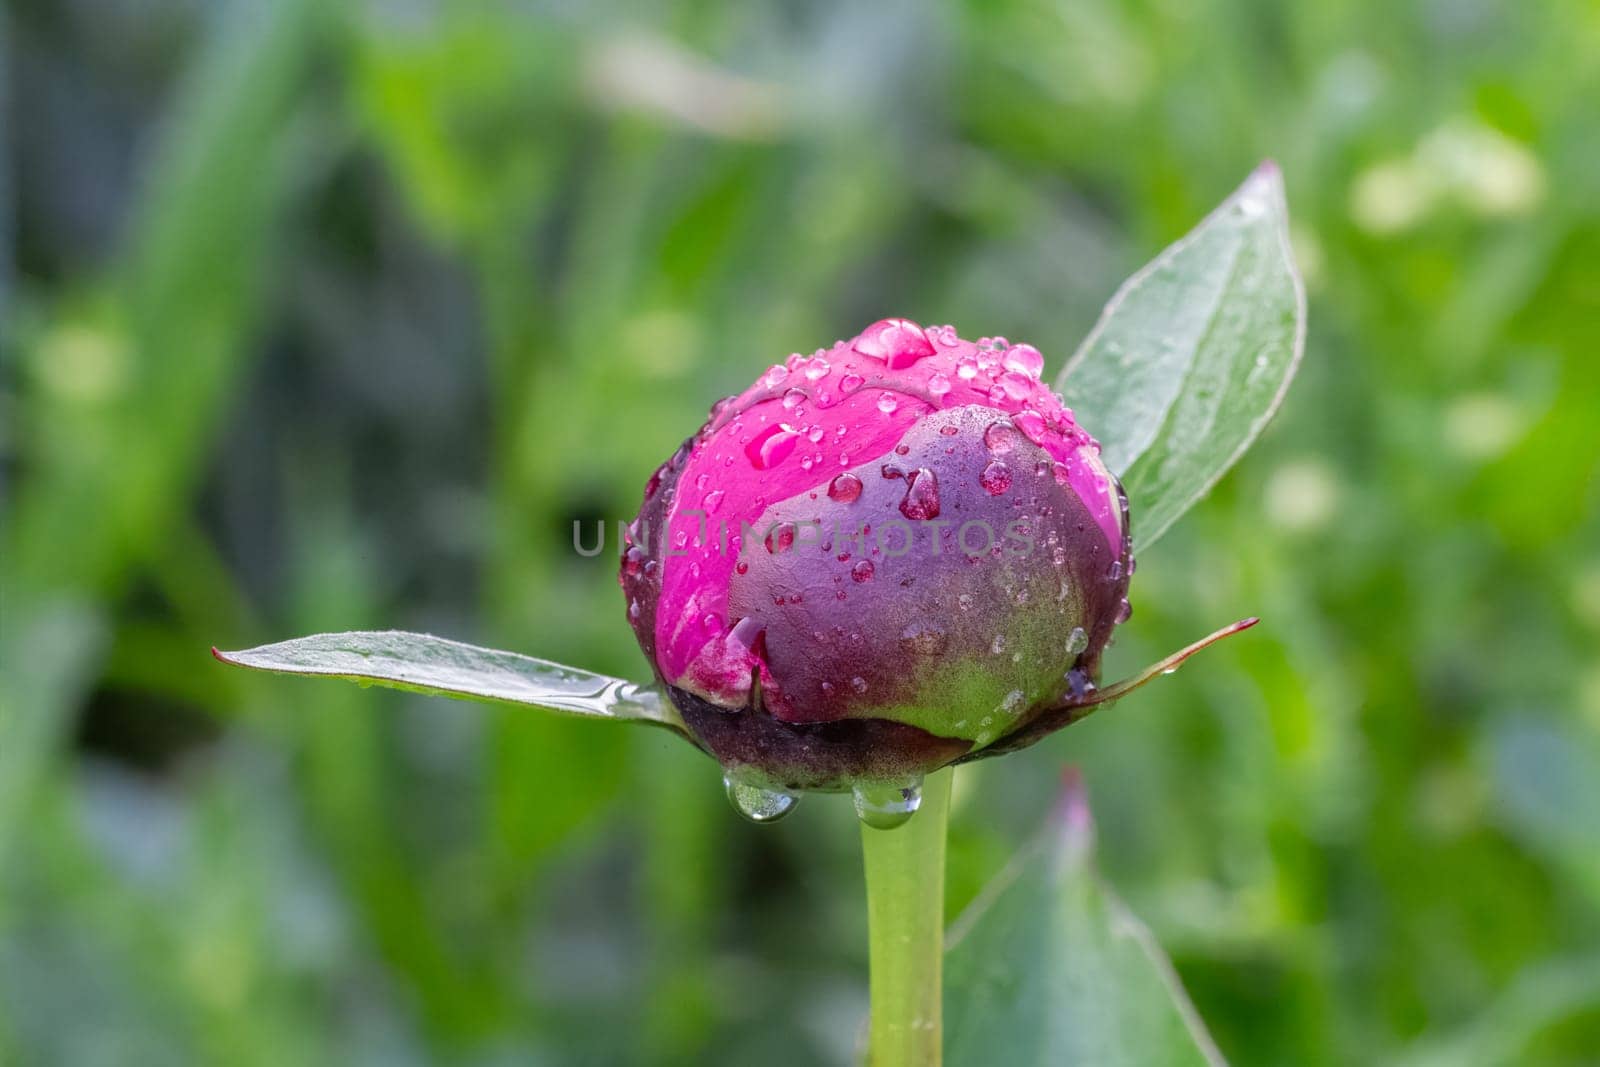 Peony bud on a stem with leaves on the blurred background. by mvg6894